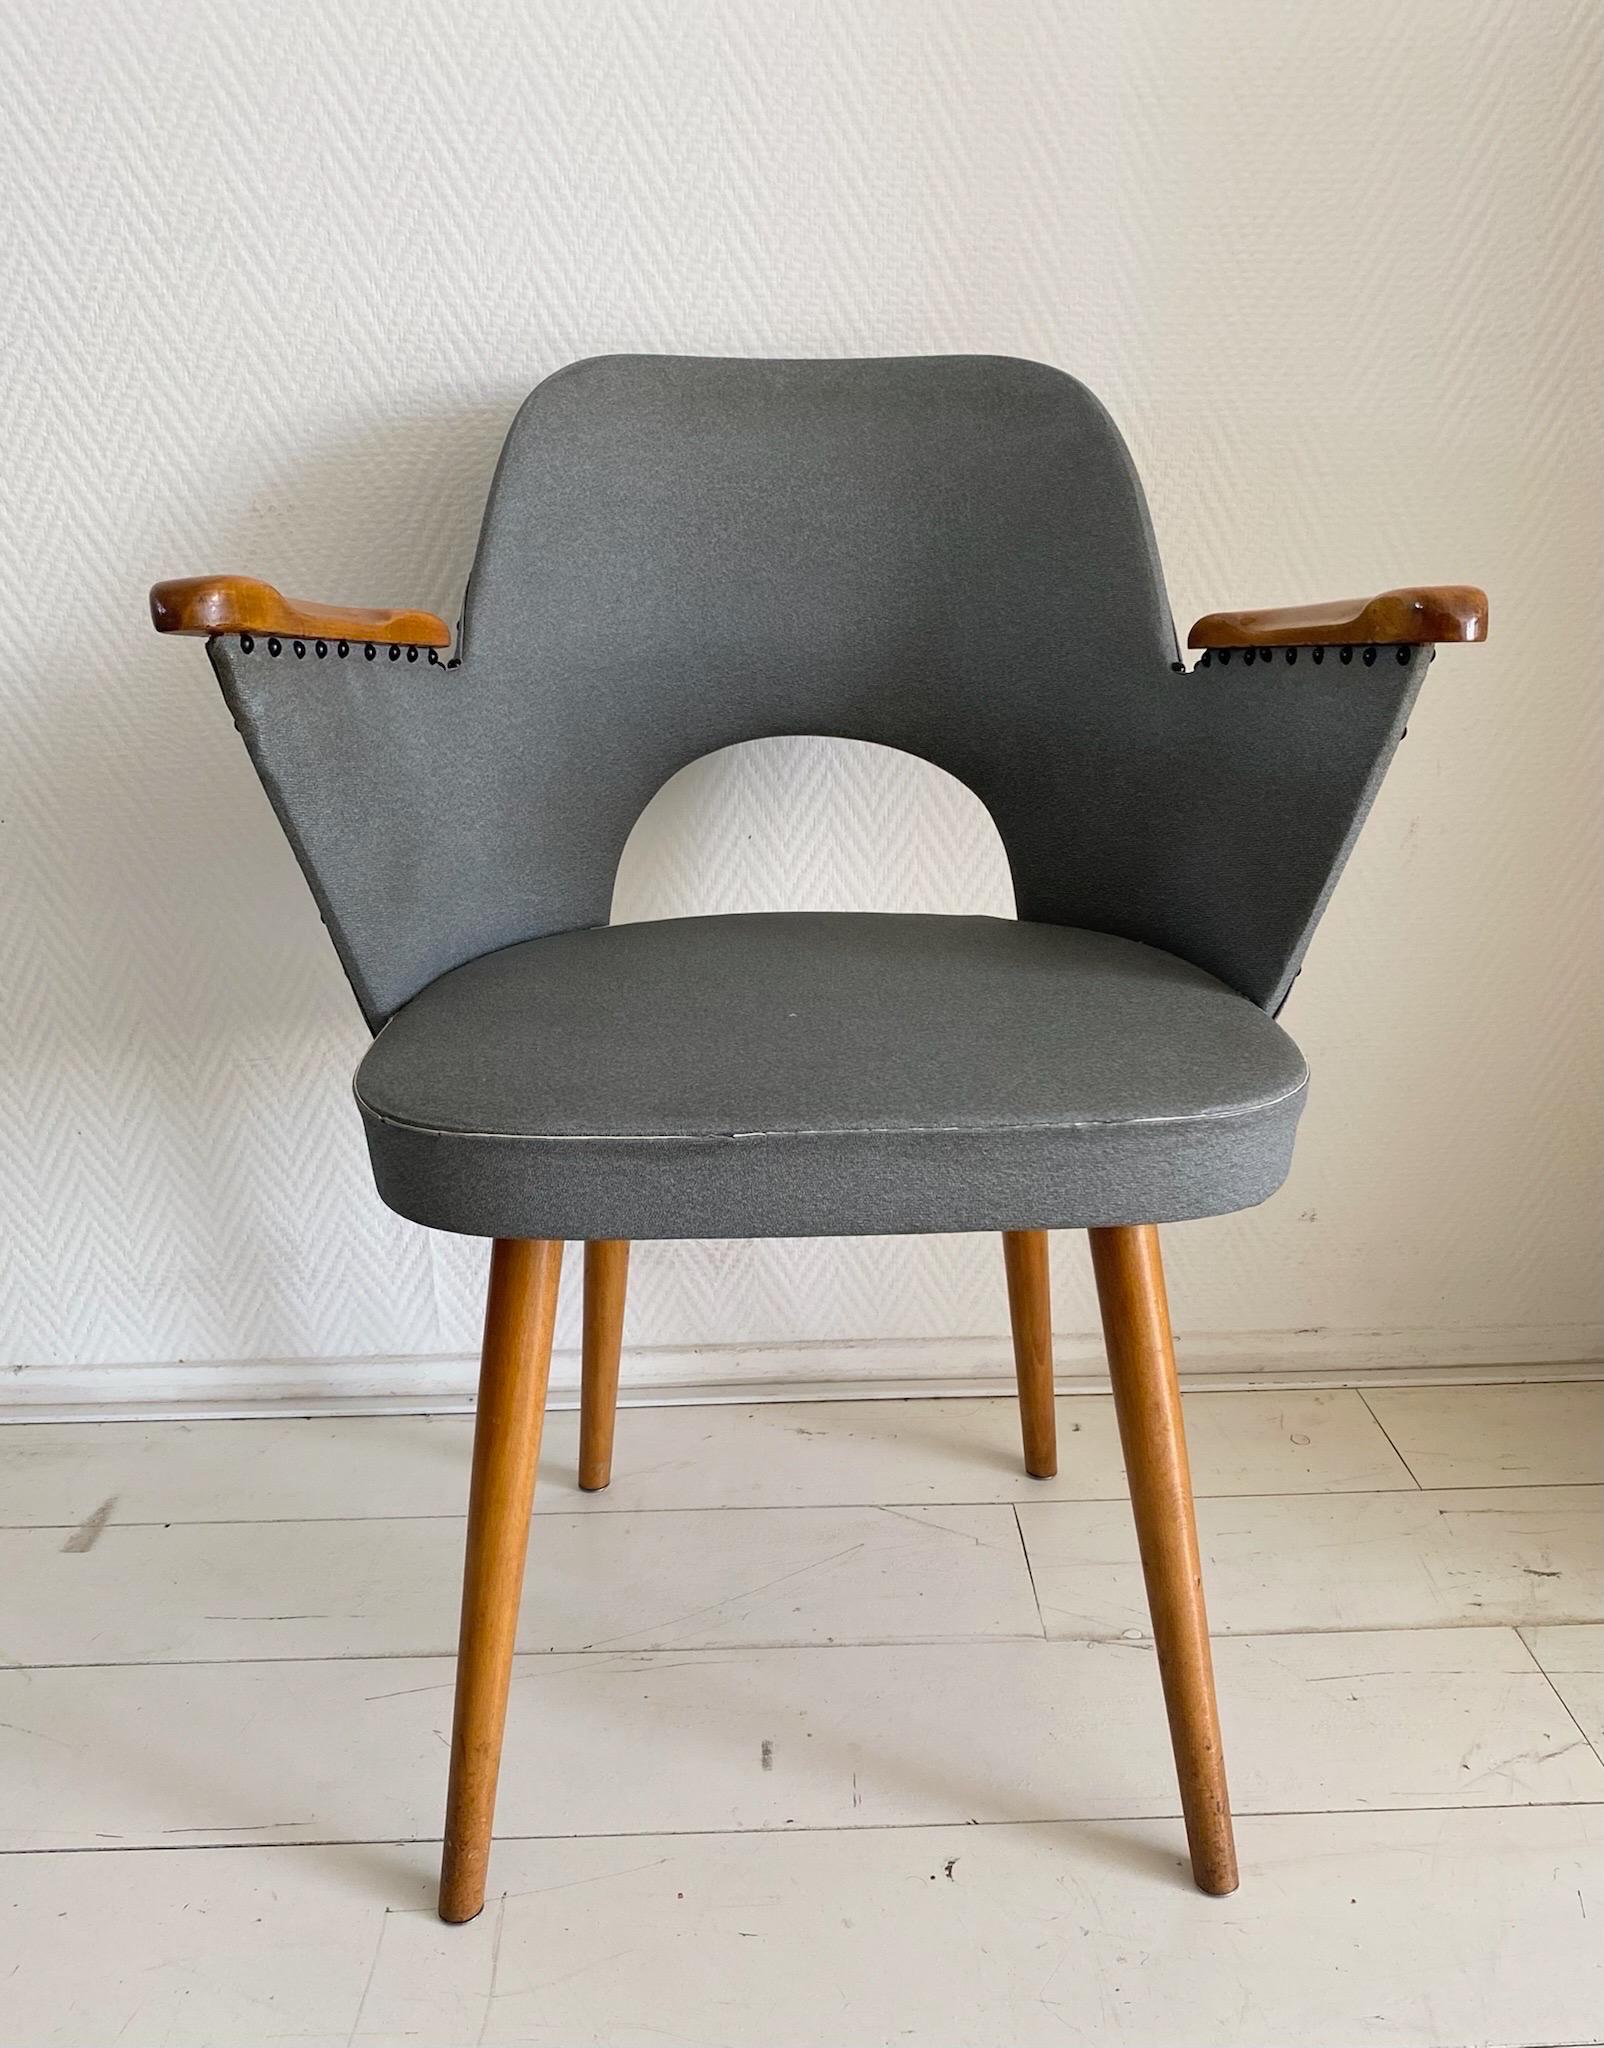 Mid-Century Modern Thonet Armchair with Leatherette Upholstery by Oswald Haerdtl, ca. 1950's For Sale